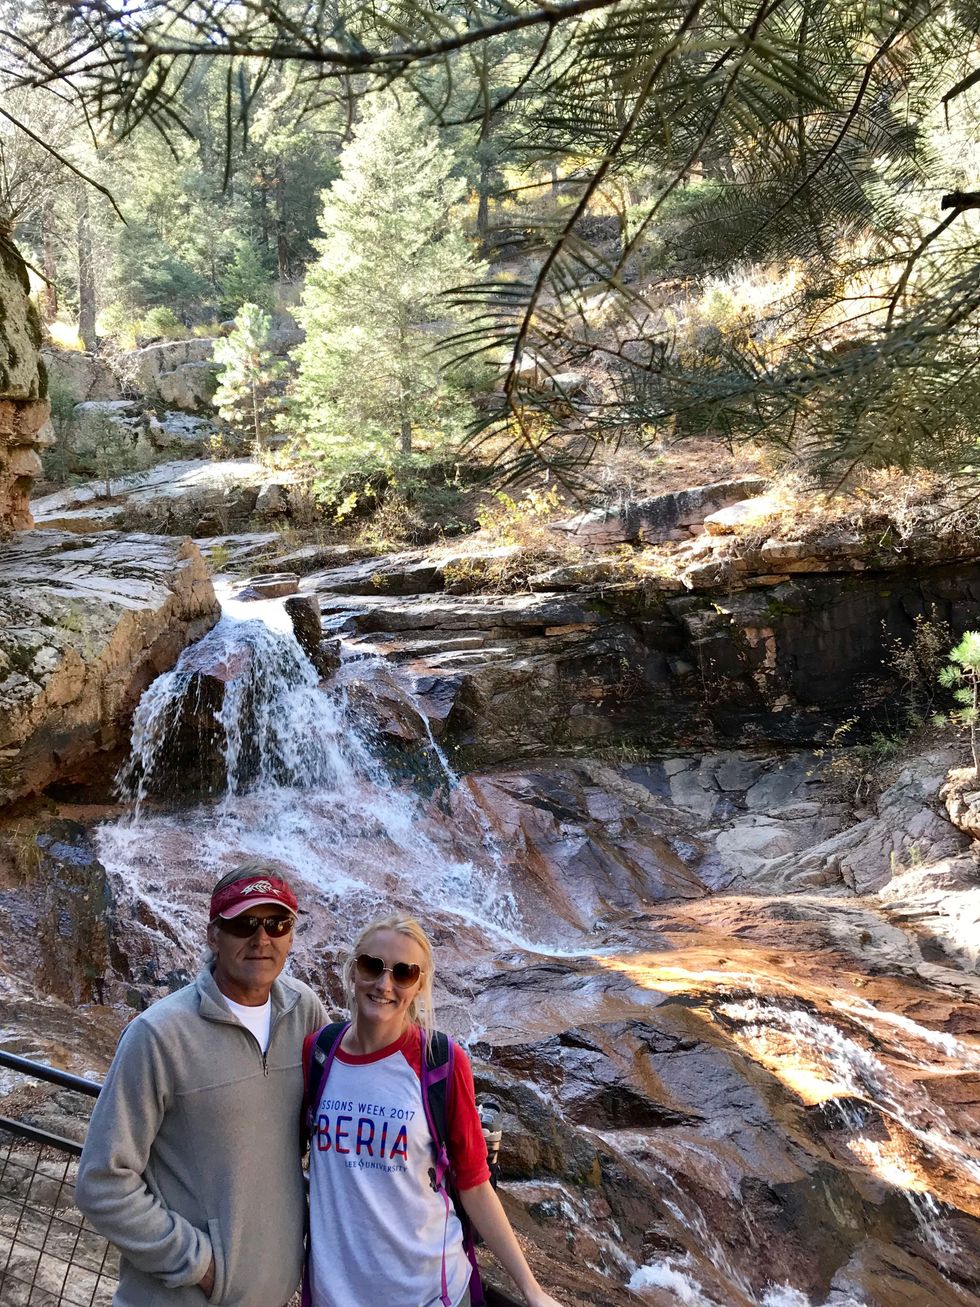 My dad and I hiking